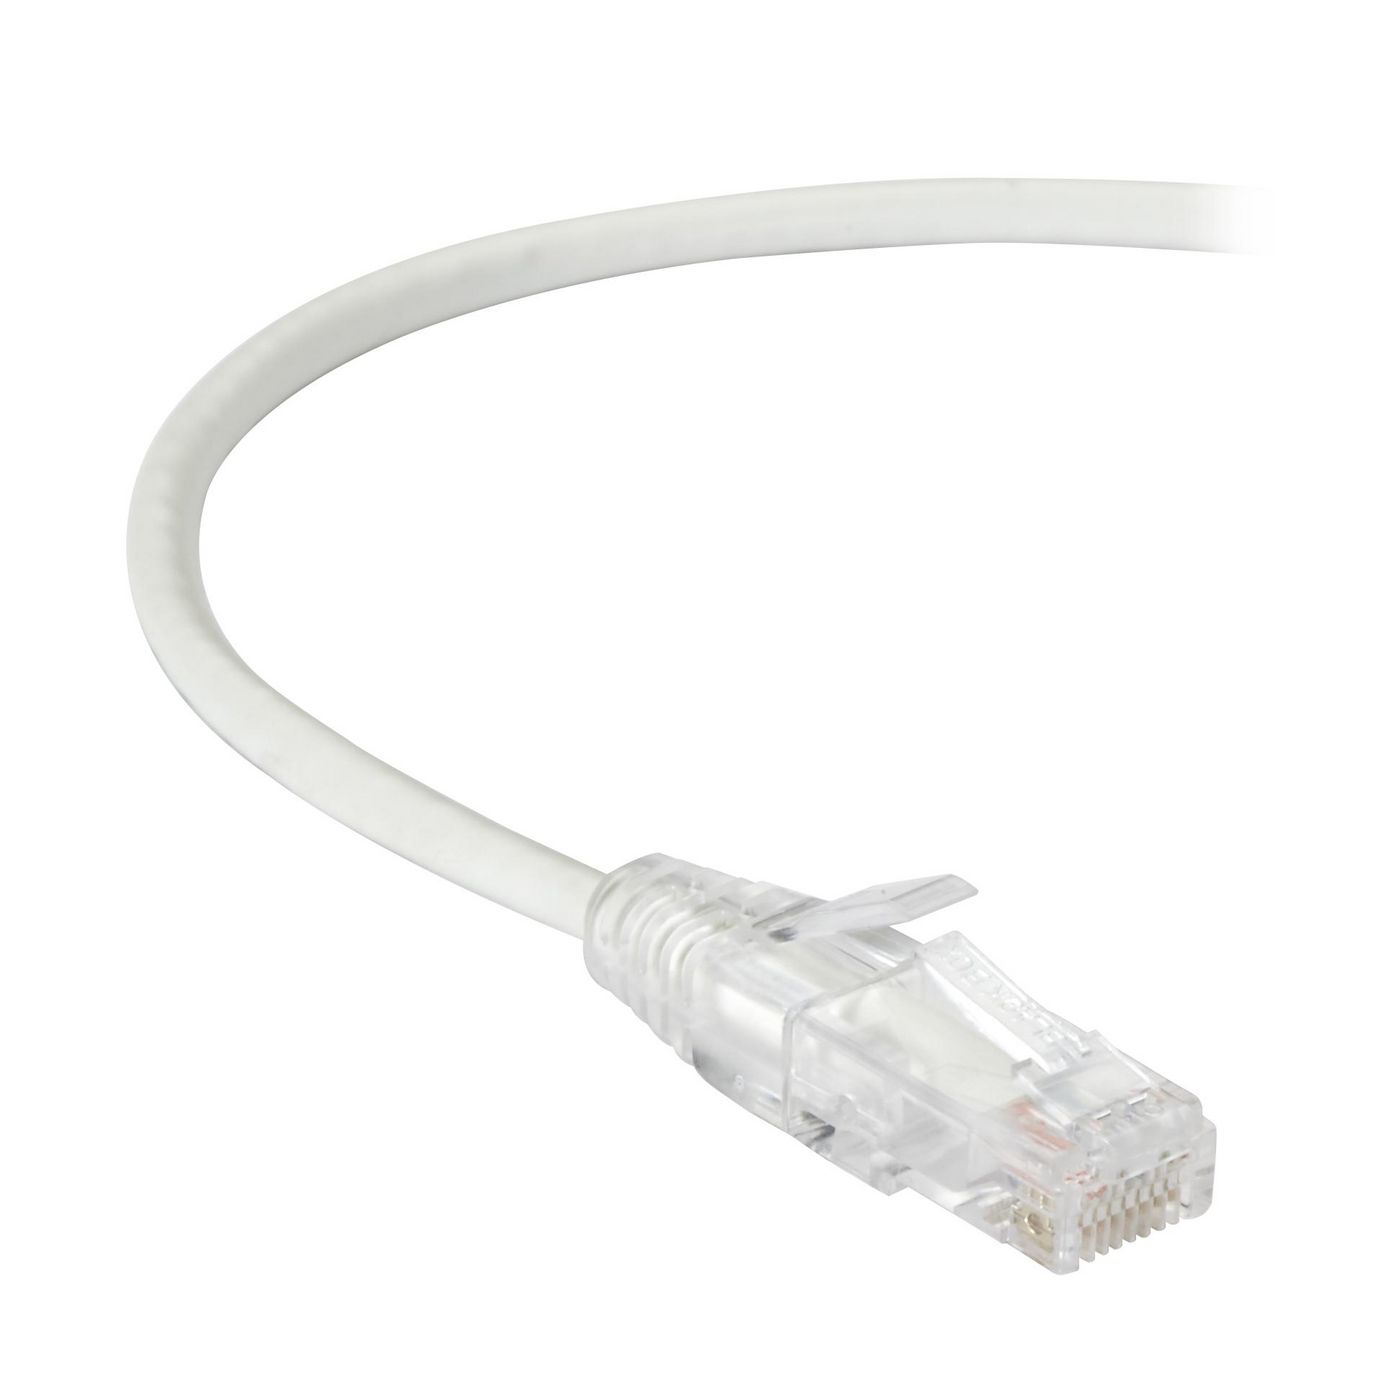 Ultra-thin Patch Cable - CAT6 - Utp - 28awg 250MHz - 3.5m - White